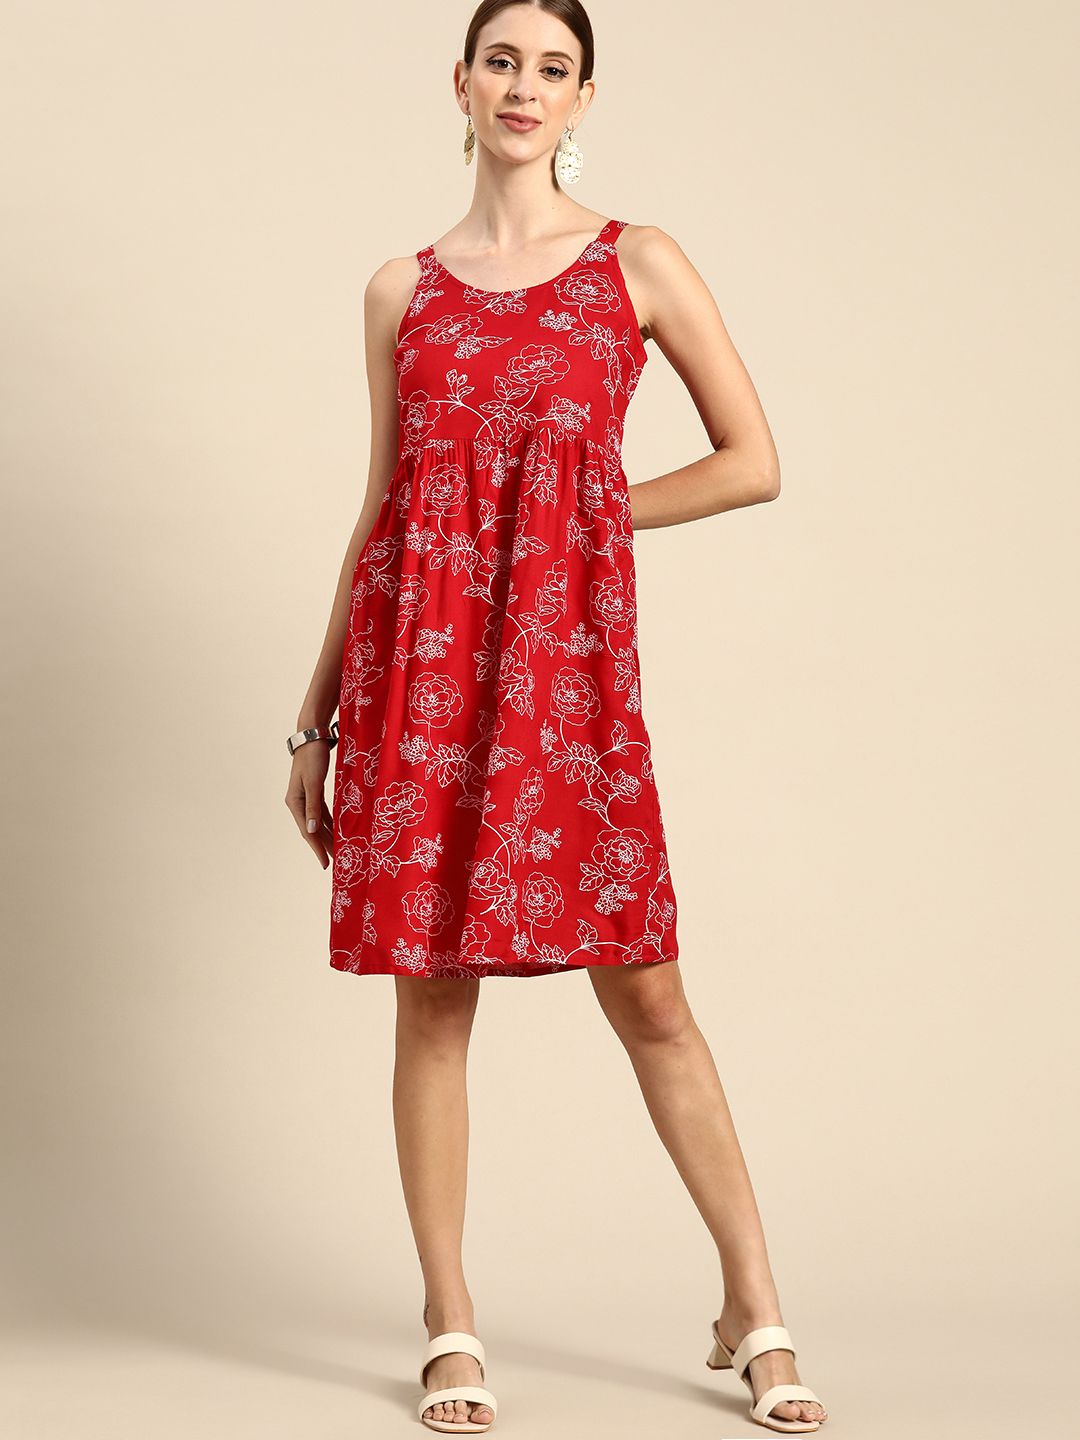 Anouk Red & White Floral A-Line Dress Price in India